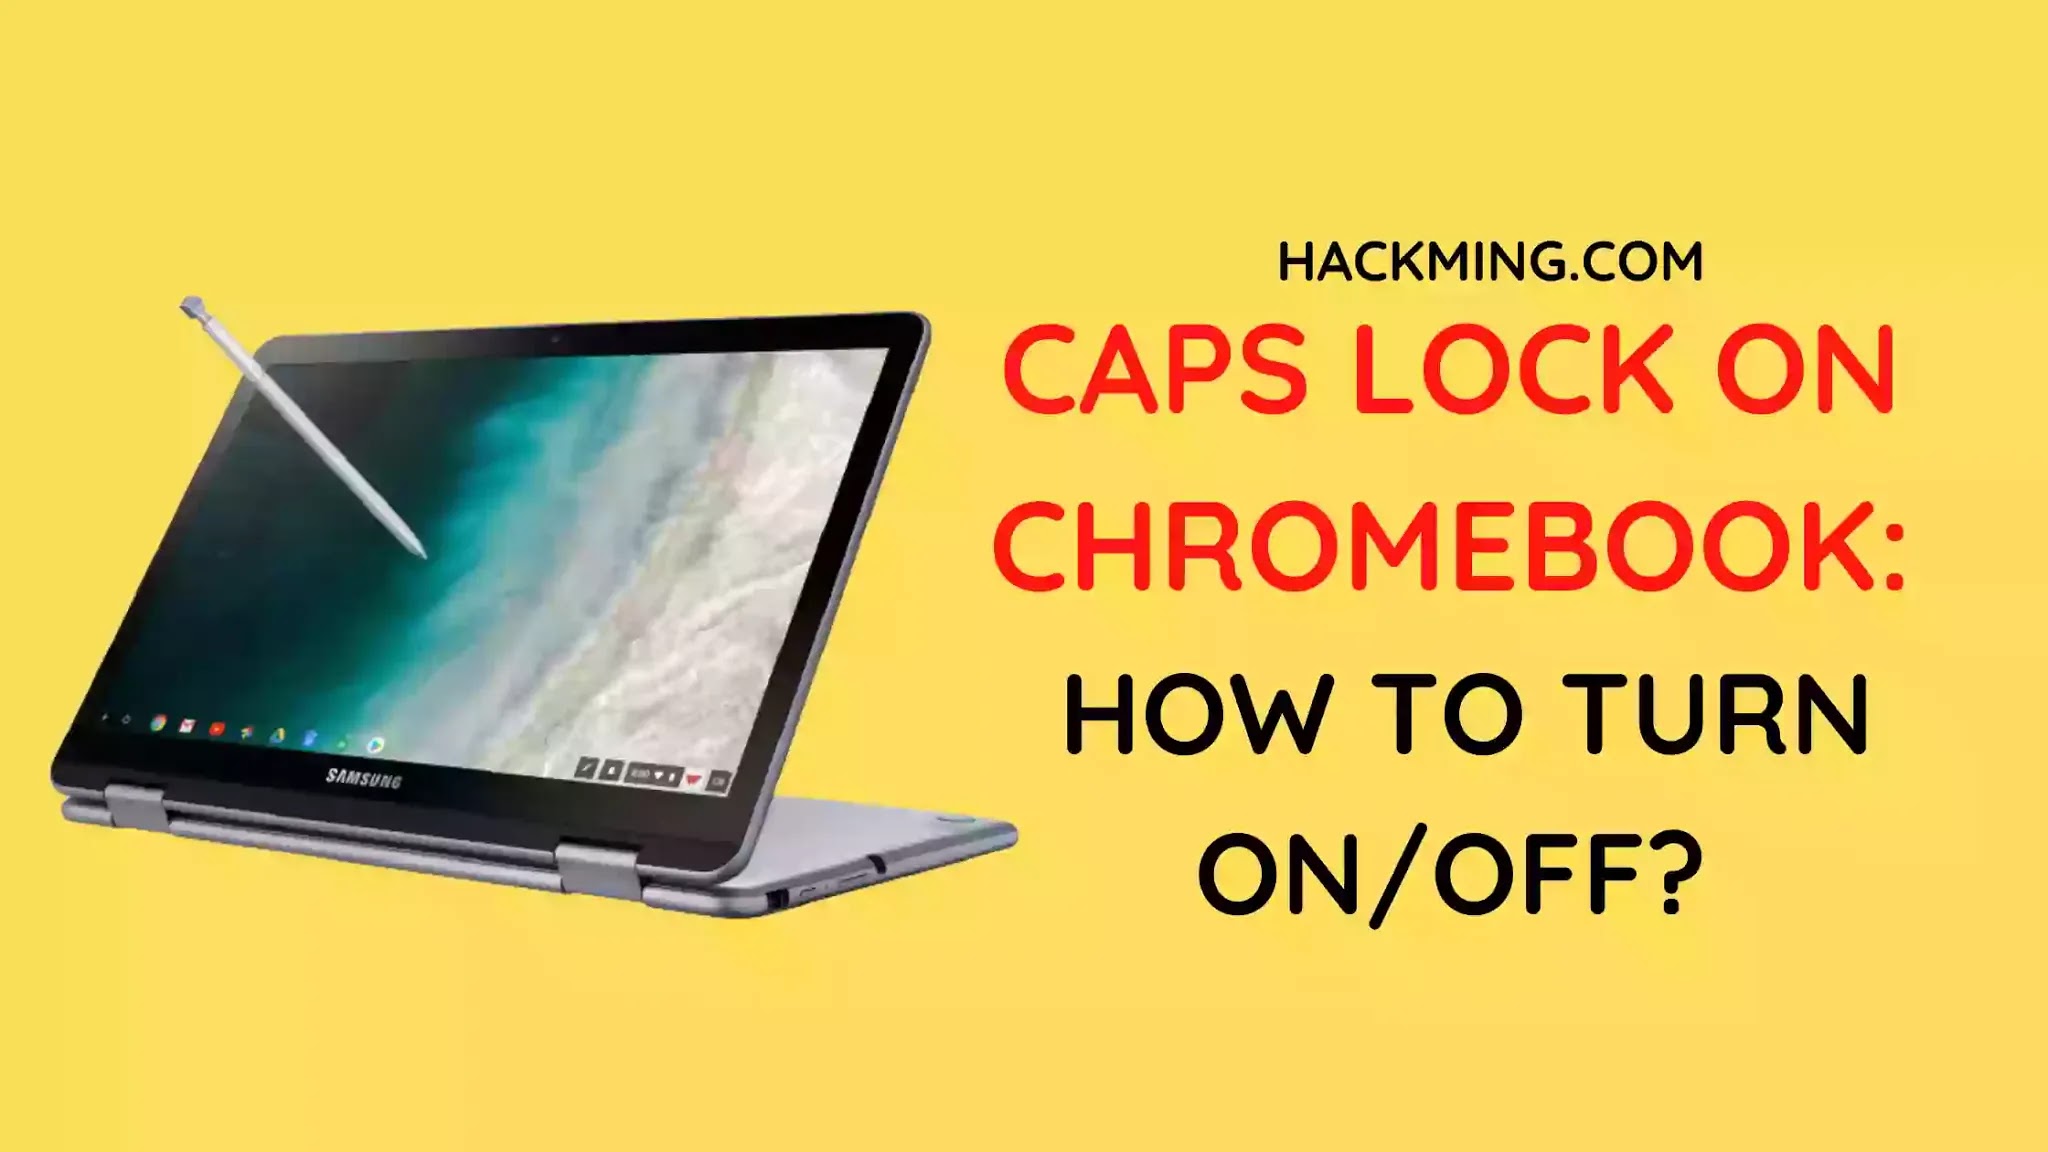 Caps Lock on Chromebook: How to turn On/Off